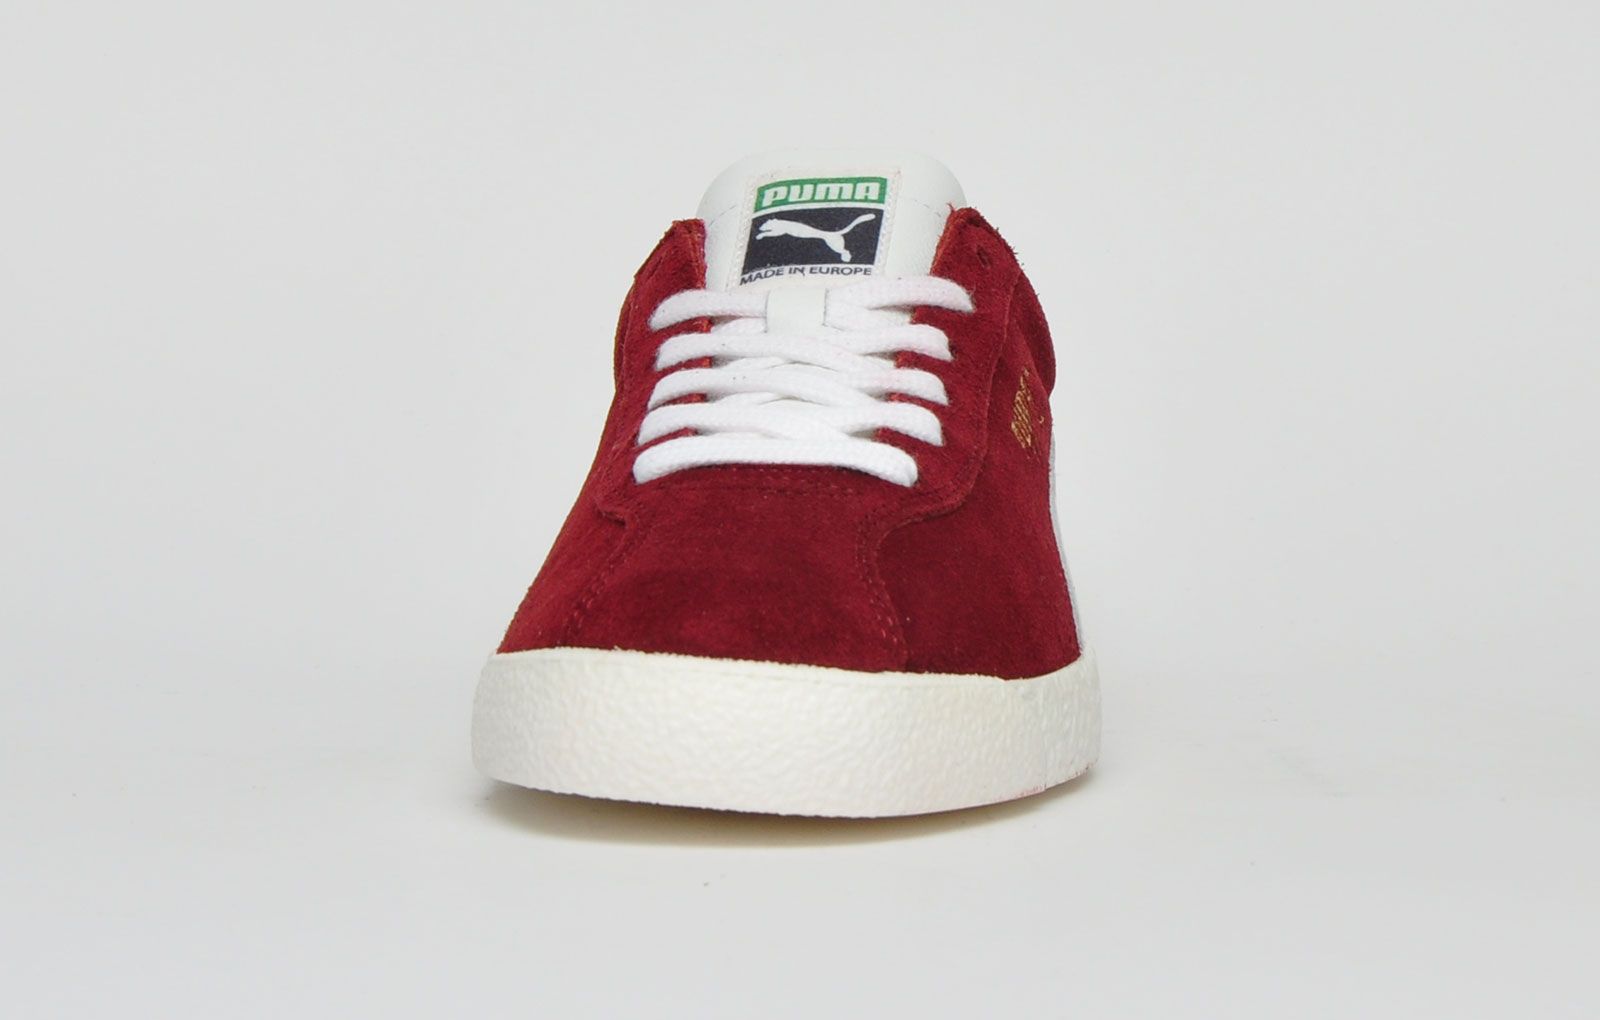 Originally released back in the late 70’s, the Puma Suede Te-Ku named after Teppich and Kunstböden tennis court surface types makes its comeback with a very exclusive UK release. <p>These Puma Suede TE-KU trainers are crafted from premium quality super soft suede with the Puma logo and the 'Puma TE-KU' branding to the side panel in contrasting gold foil finish, sitting on a textured vintage styled rubber outsole for high impact retro street appeal.</p> <p> - Suede leather upper </p> <p>- Secure lace up system</p> <p> - Textured vintage styled midsole </p> <p>- Durable outsole with treaded design for added grip</p> <p> - Puma branding throughout</p>